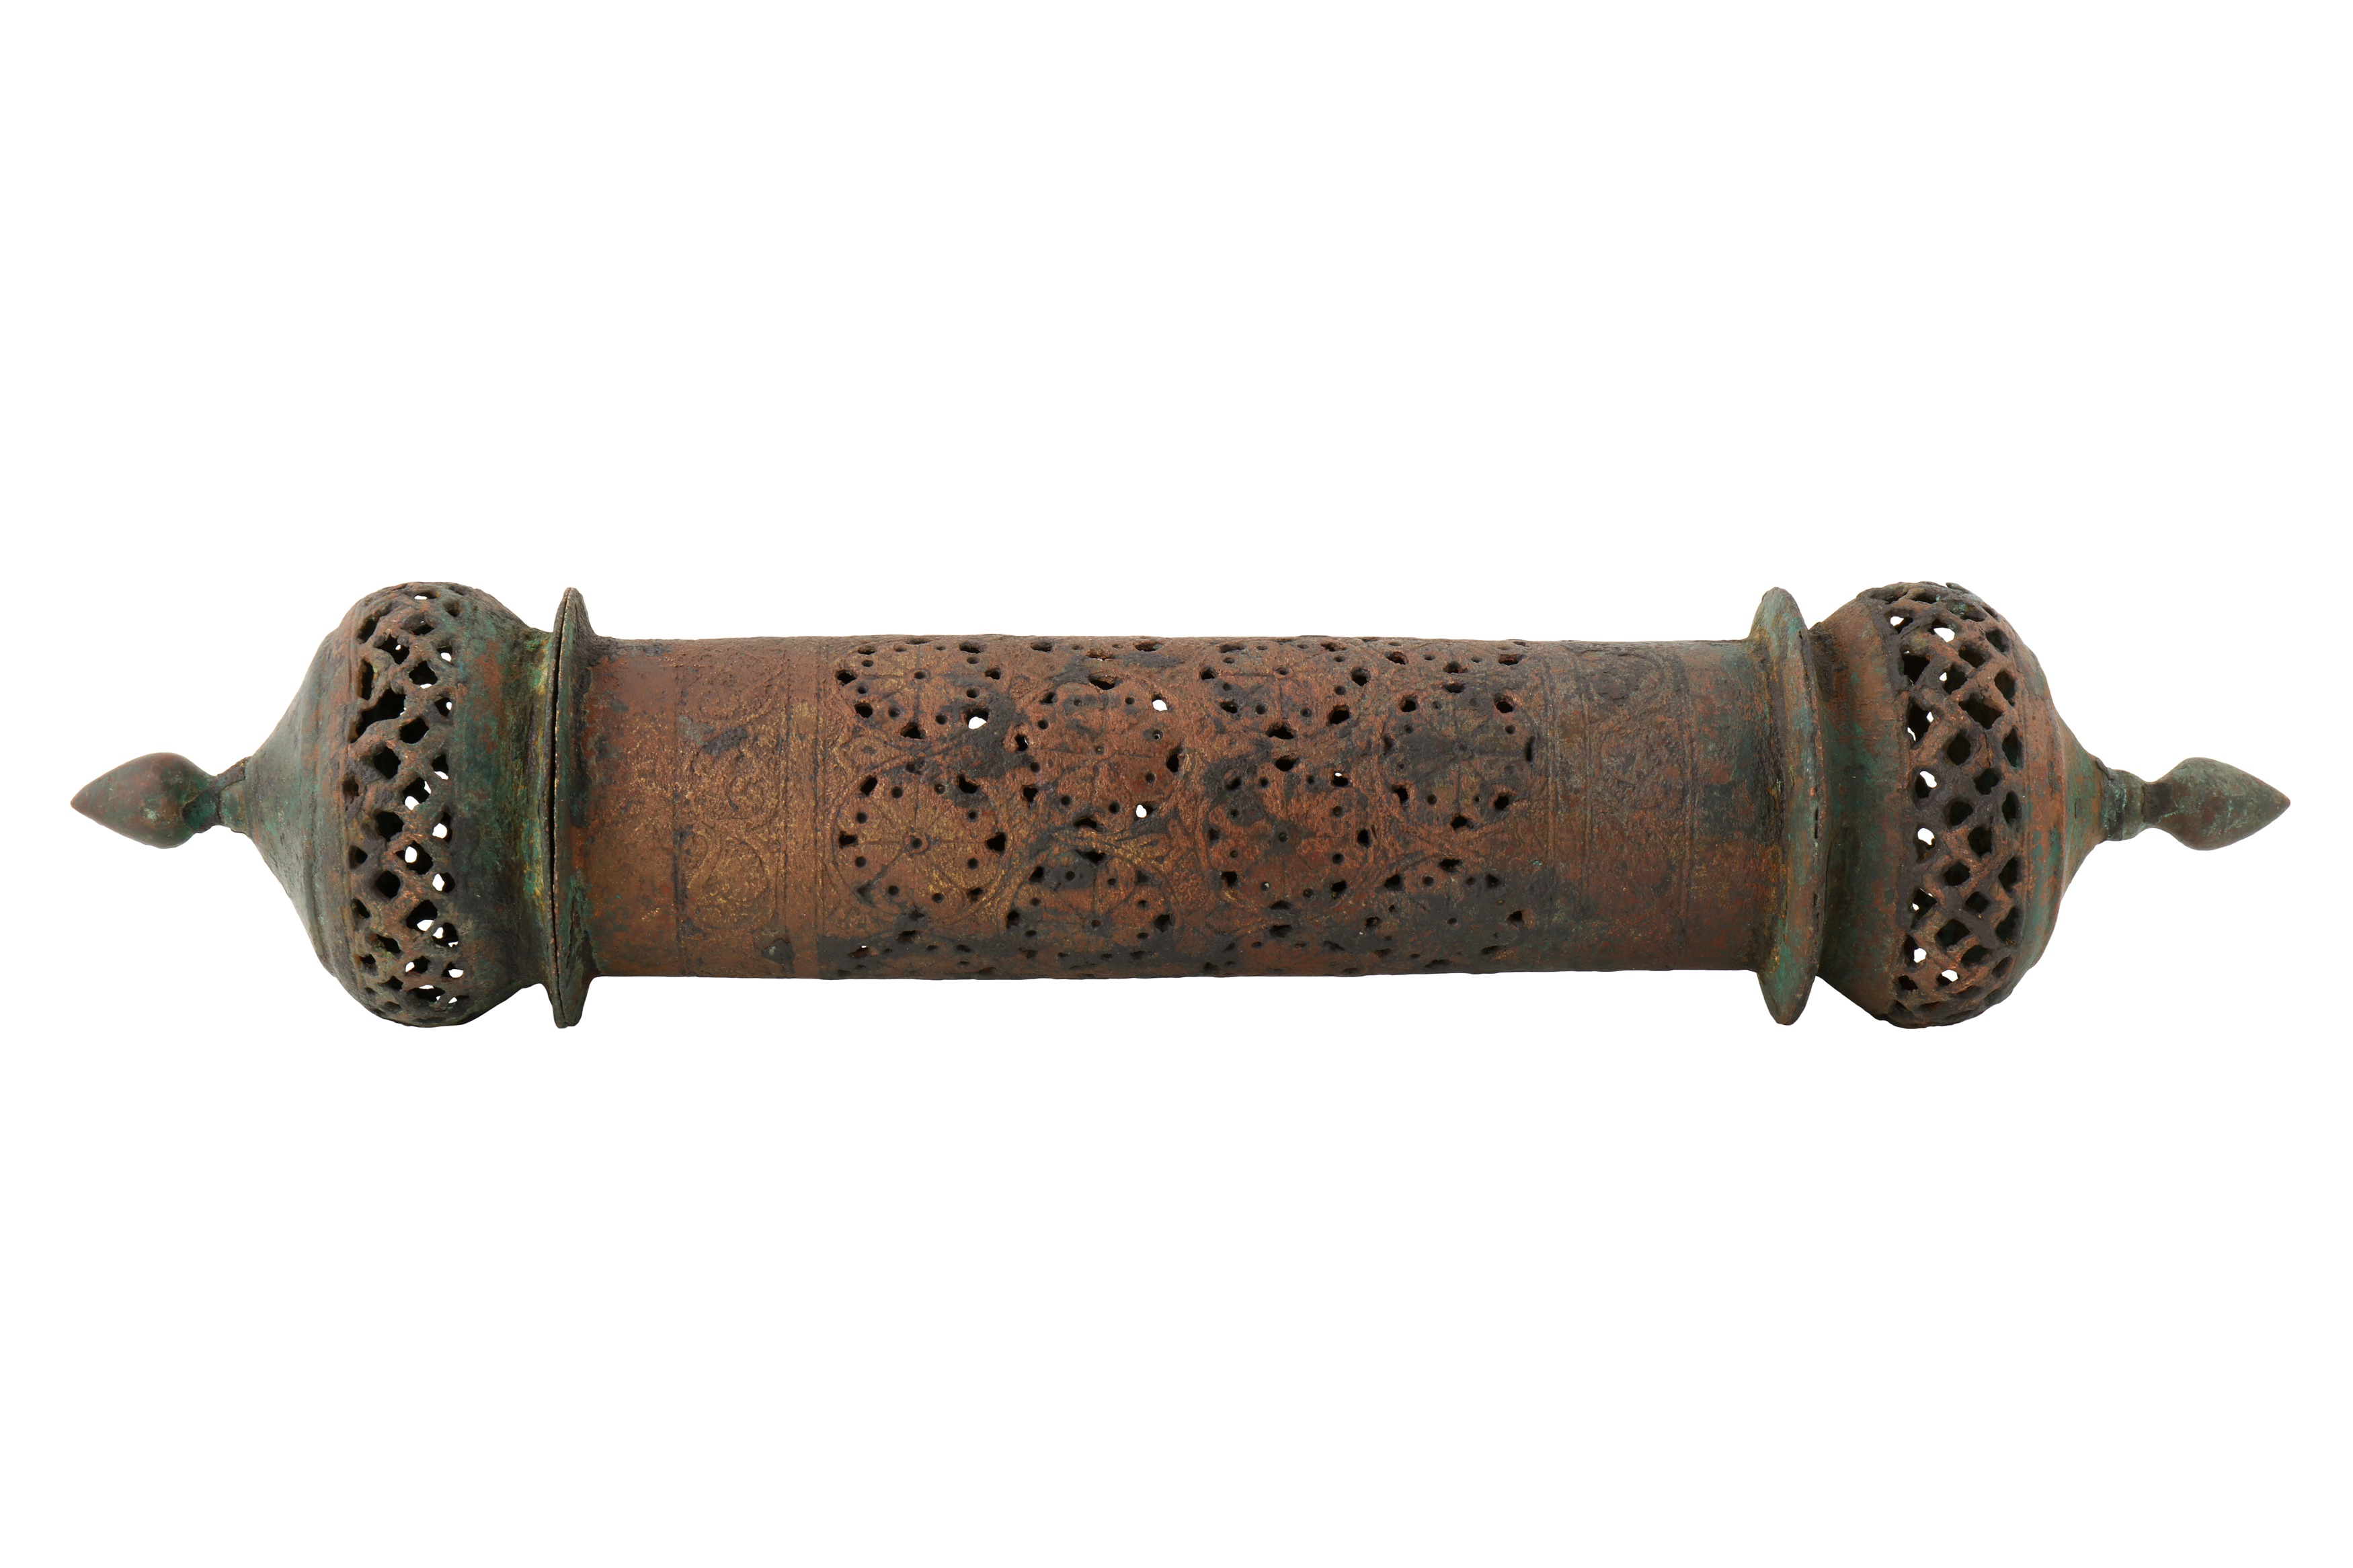 A LARGE 12TH-13TH CENTURY PERSIAN SELJUK OPEN WORK SCROLL HOLDER - Image 2 of 4